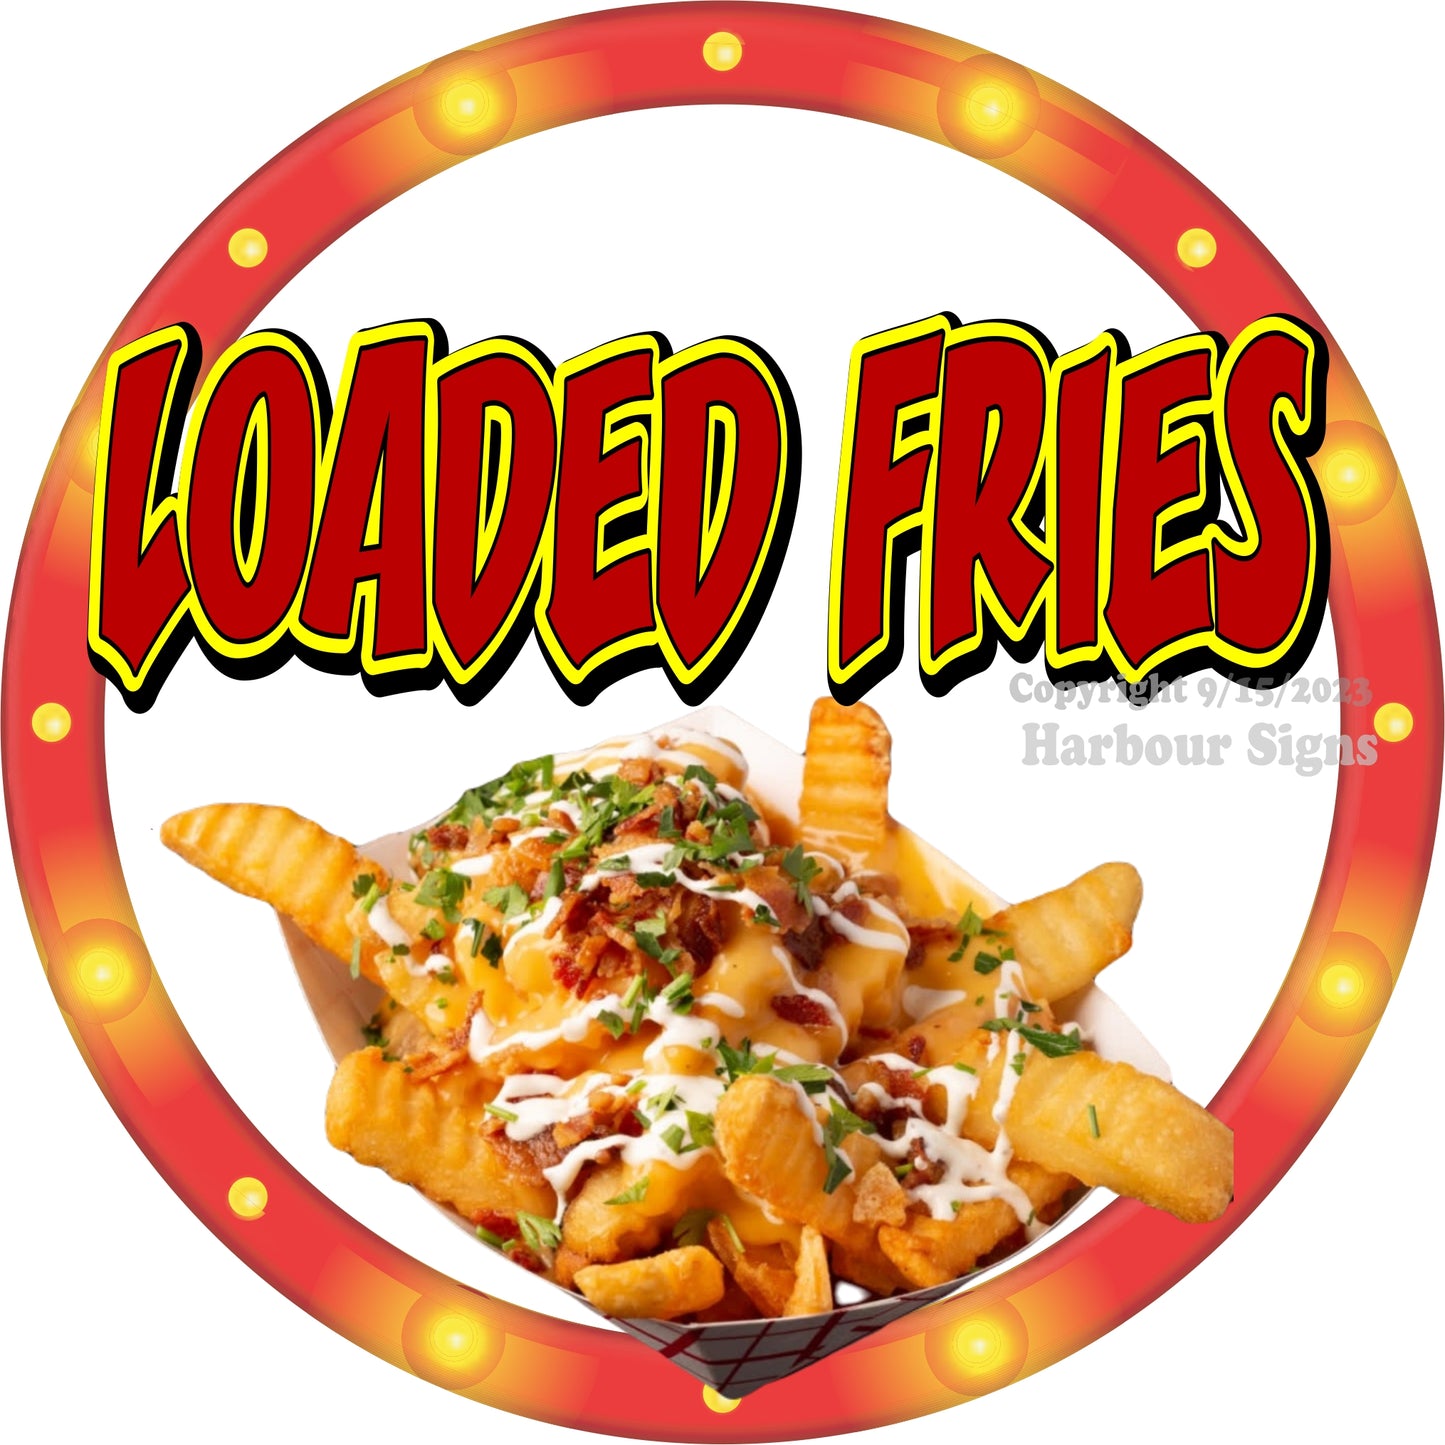 Loaded Fries Decal Food Truck Concession Vinyl Sticker c2